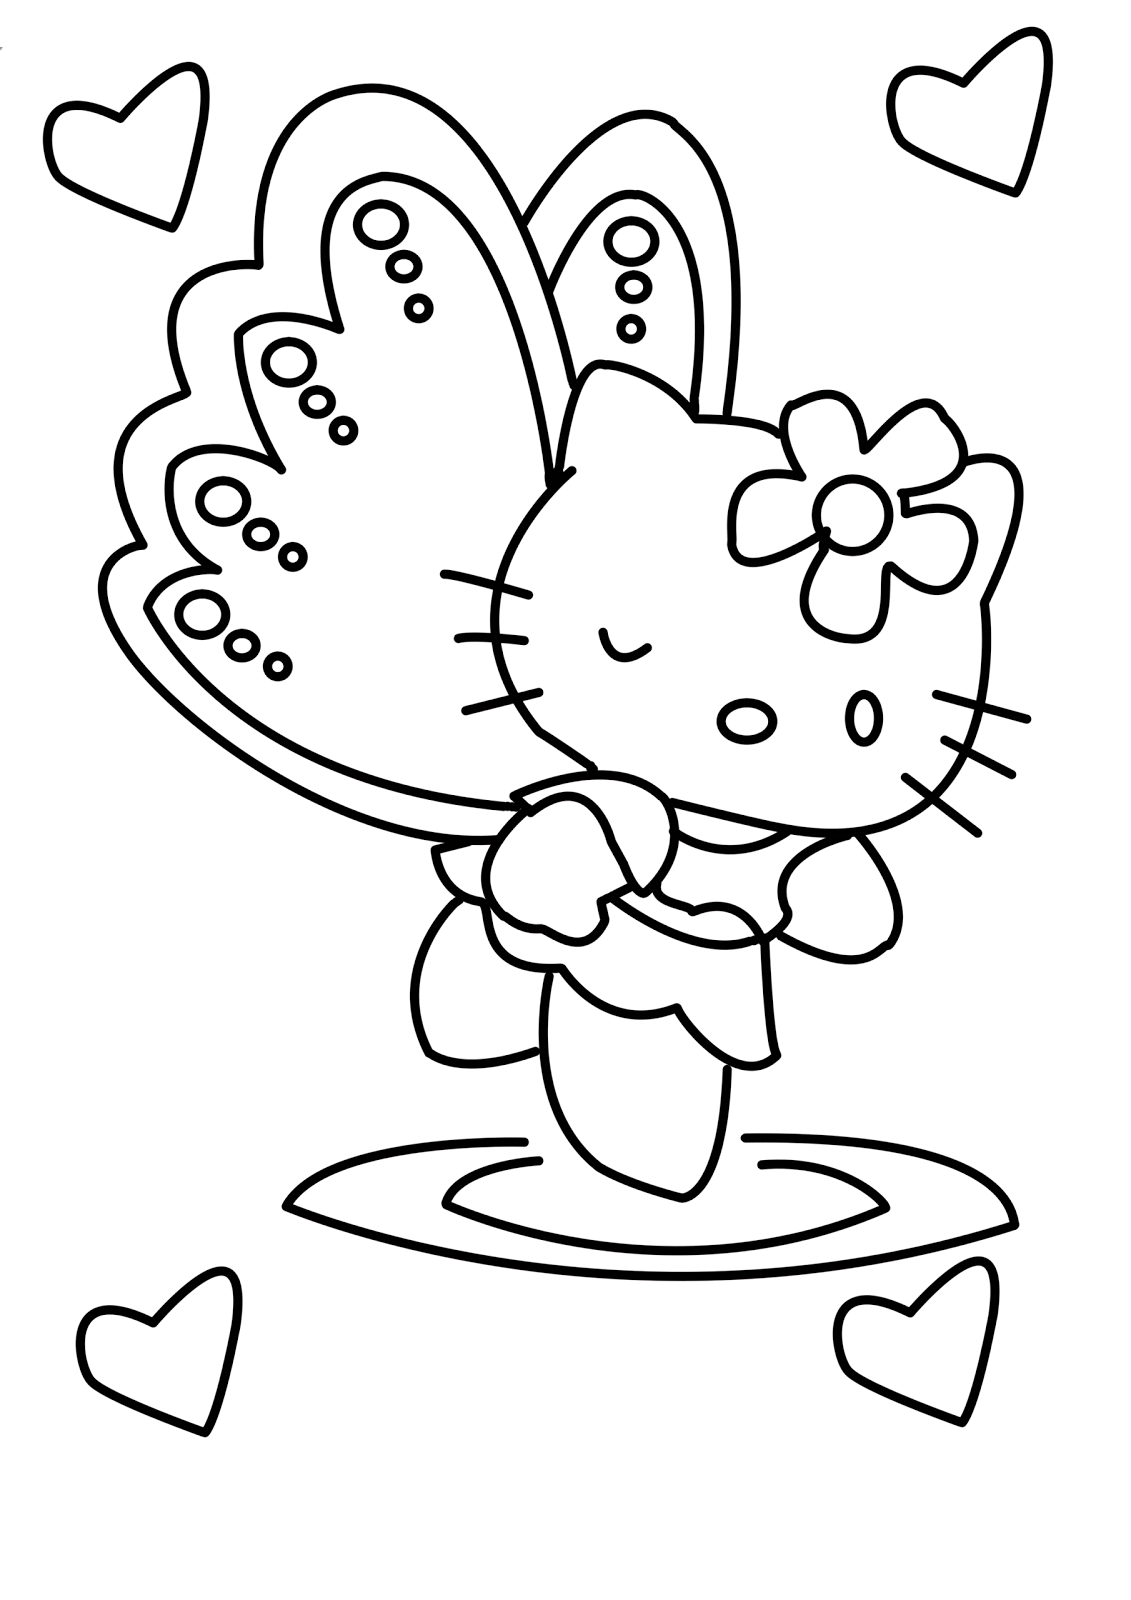 hello kitty girlie  all free coloring page for kids